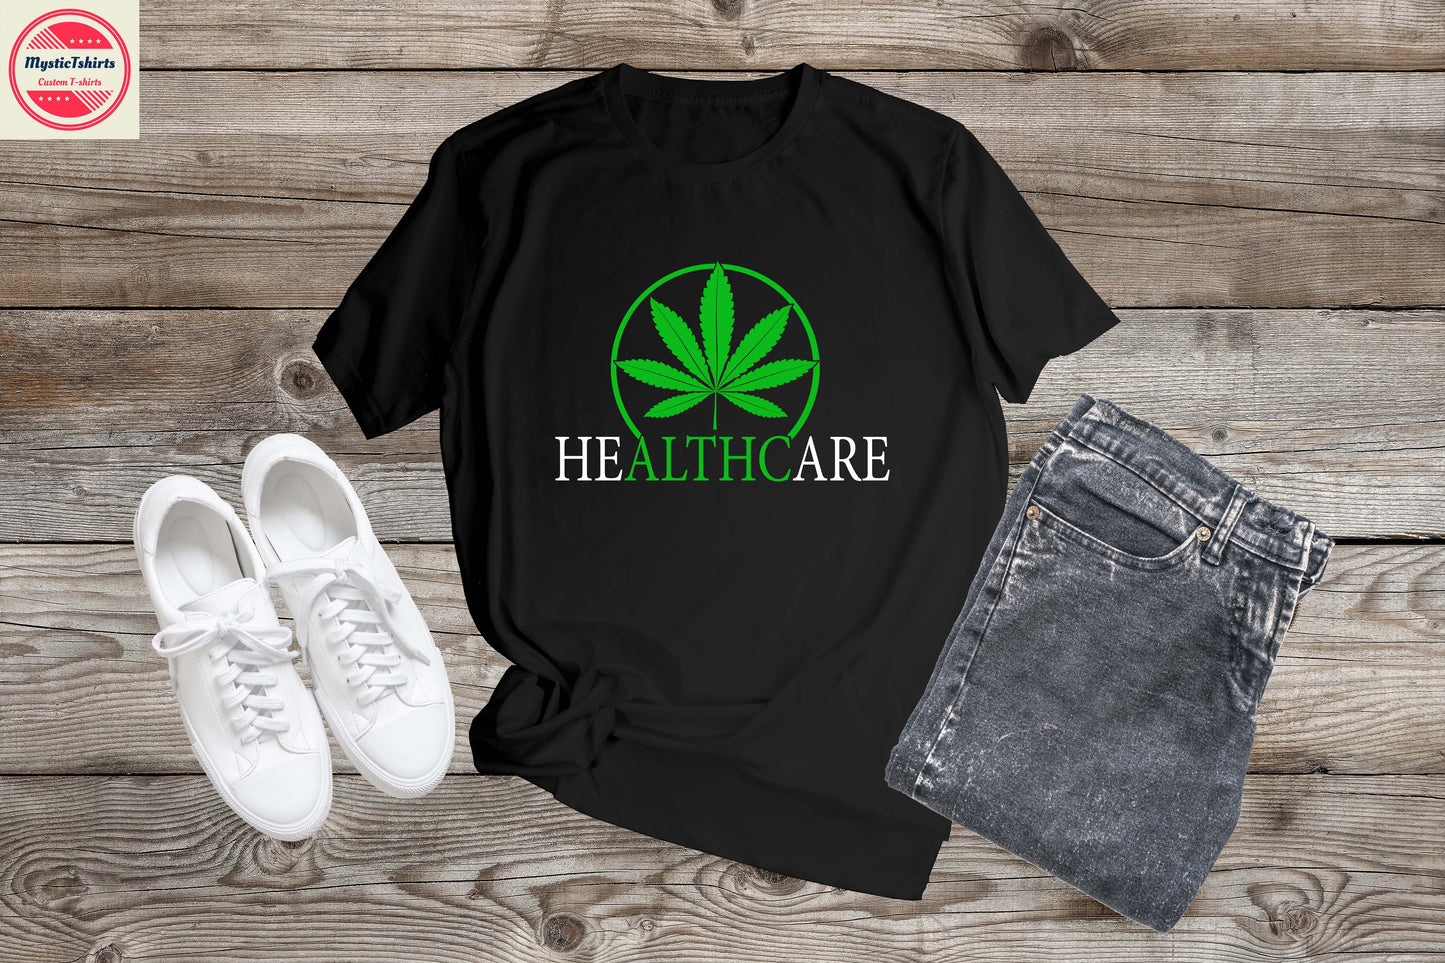 194. HEALTHCARE, Custom Made Shirt, Personalized T-Shirt, Custom Text, Make Your Own Shirt, Custom Tee